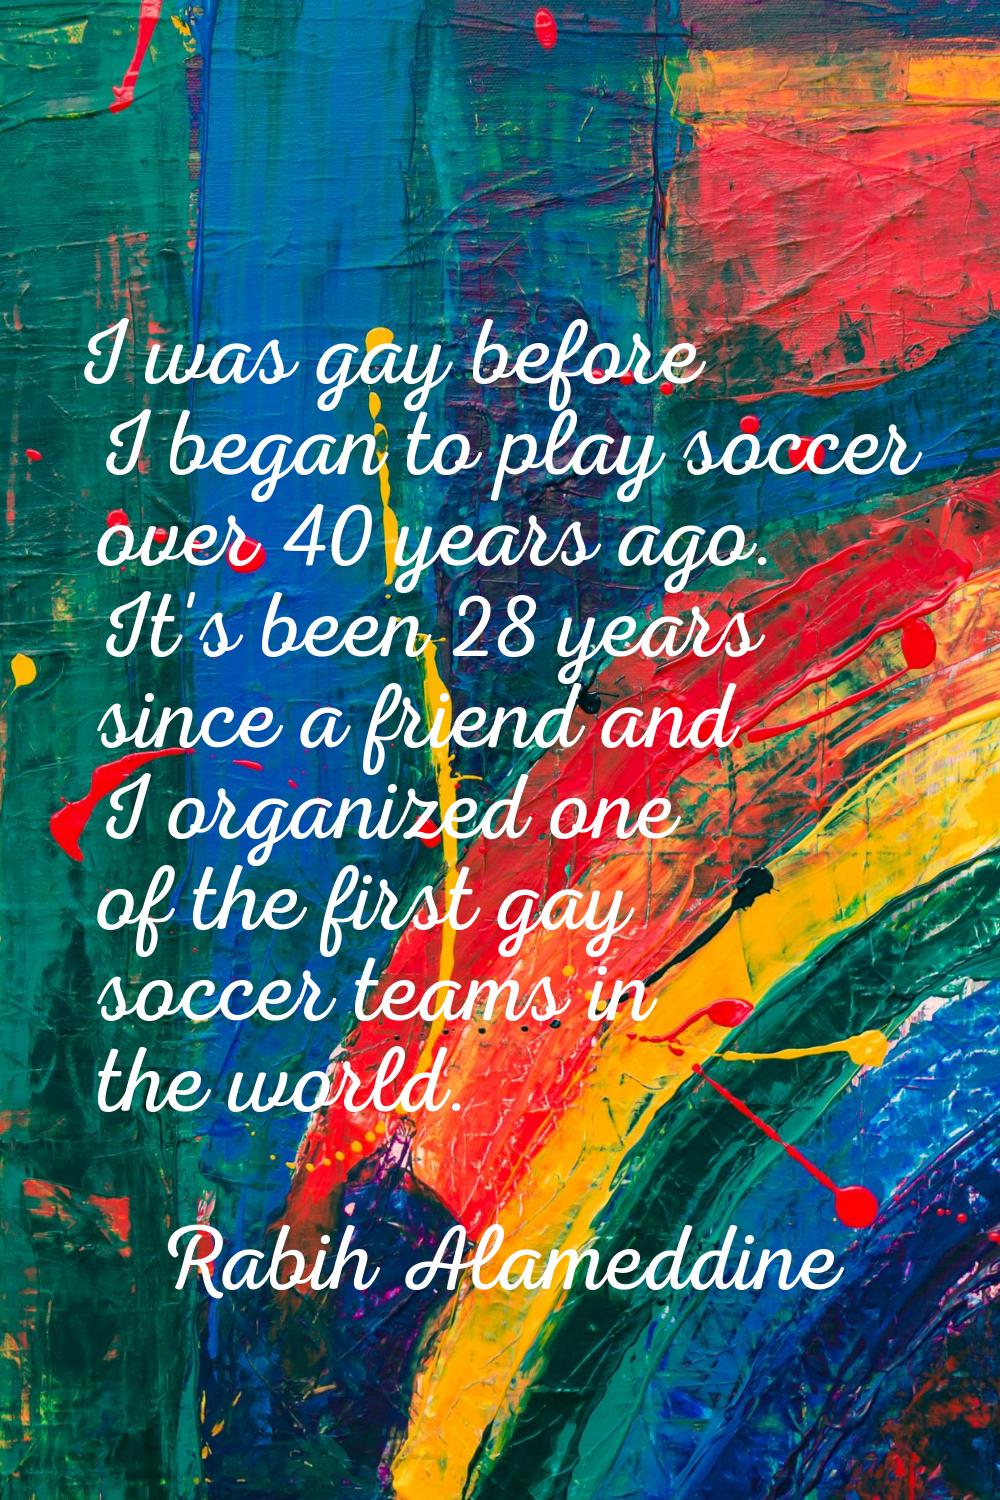 I was gay before I began to play soccer over 40 years ago. It's been 28 years since a friend and I 